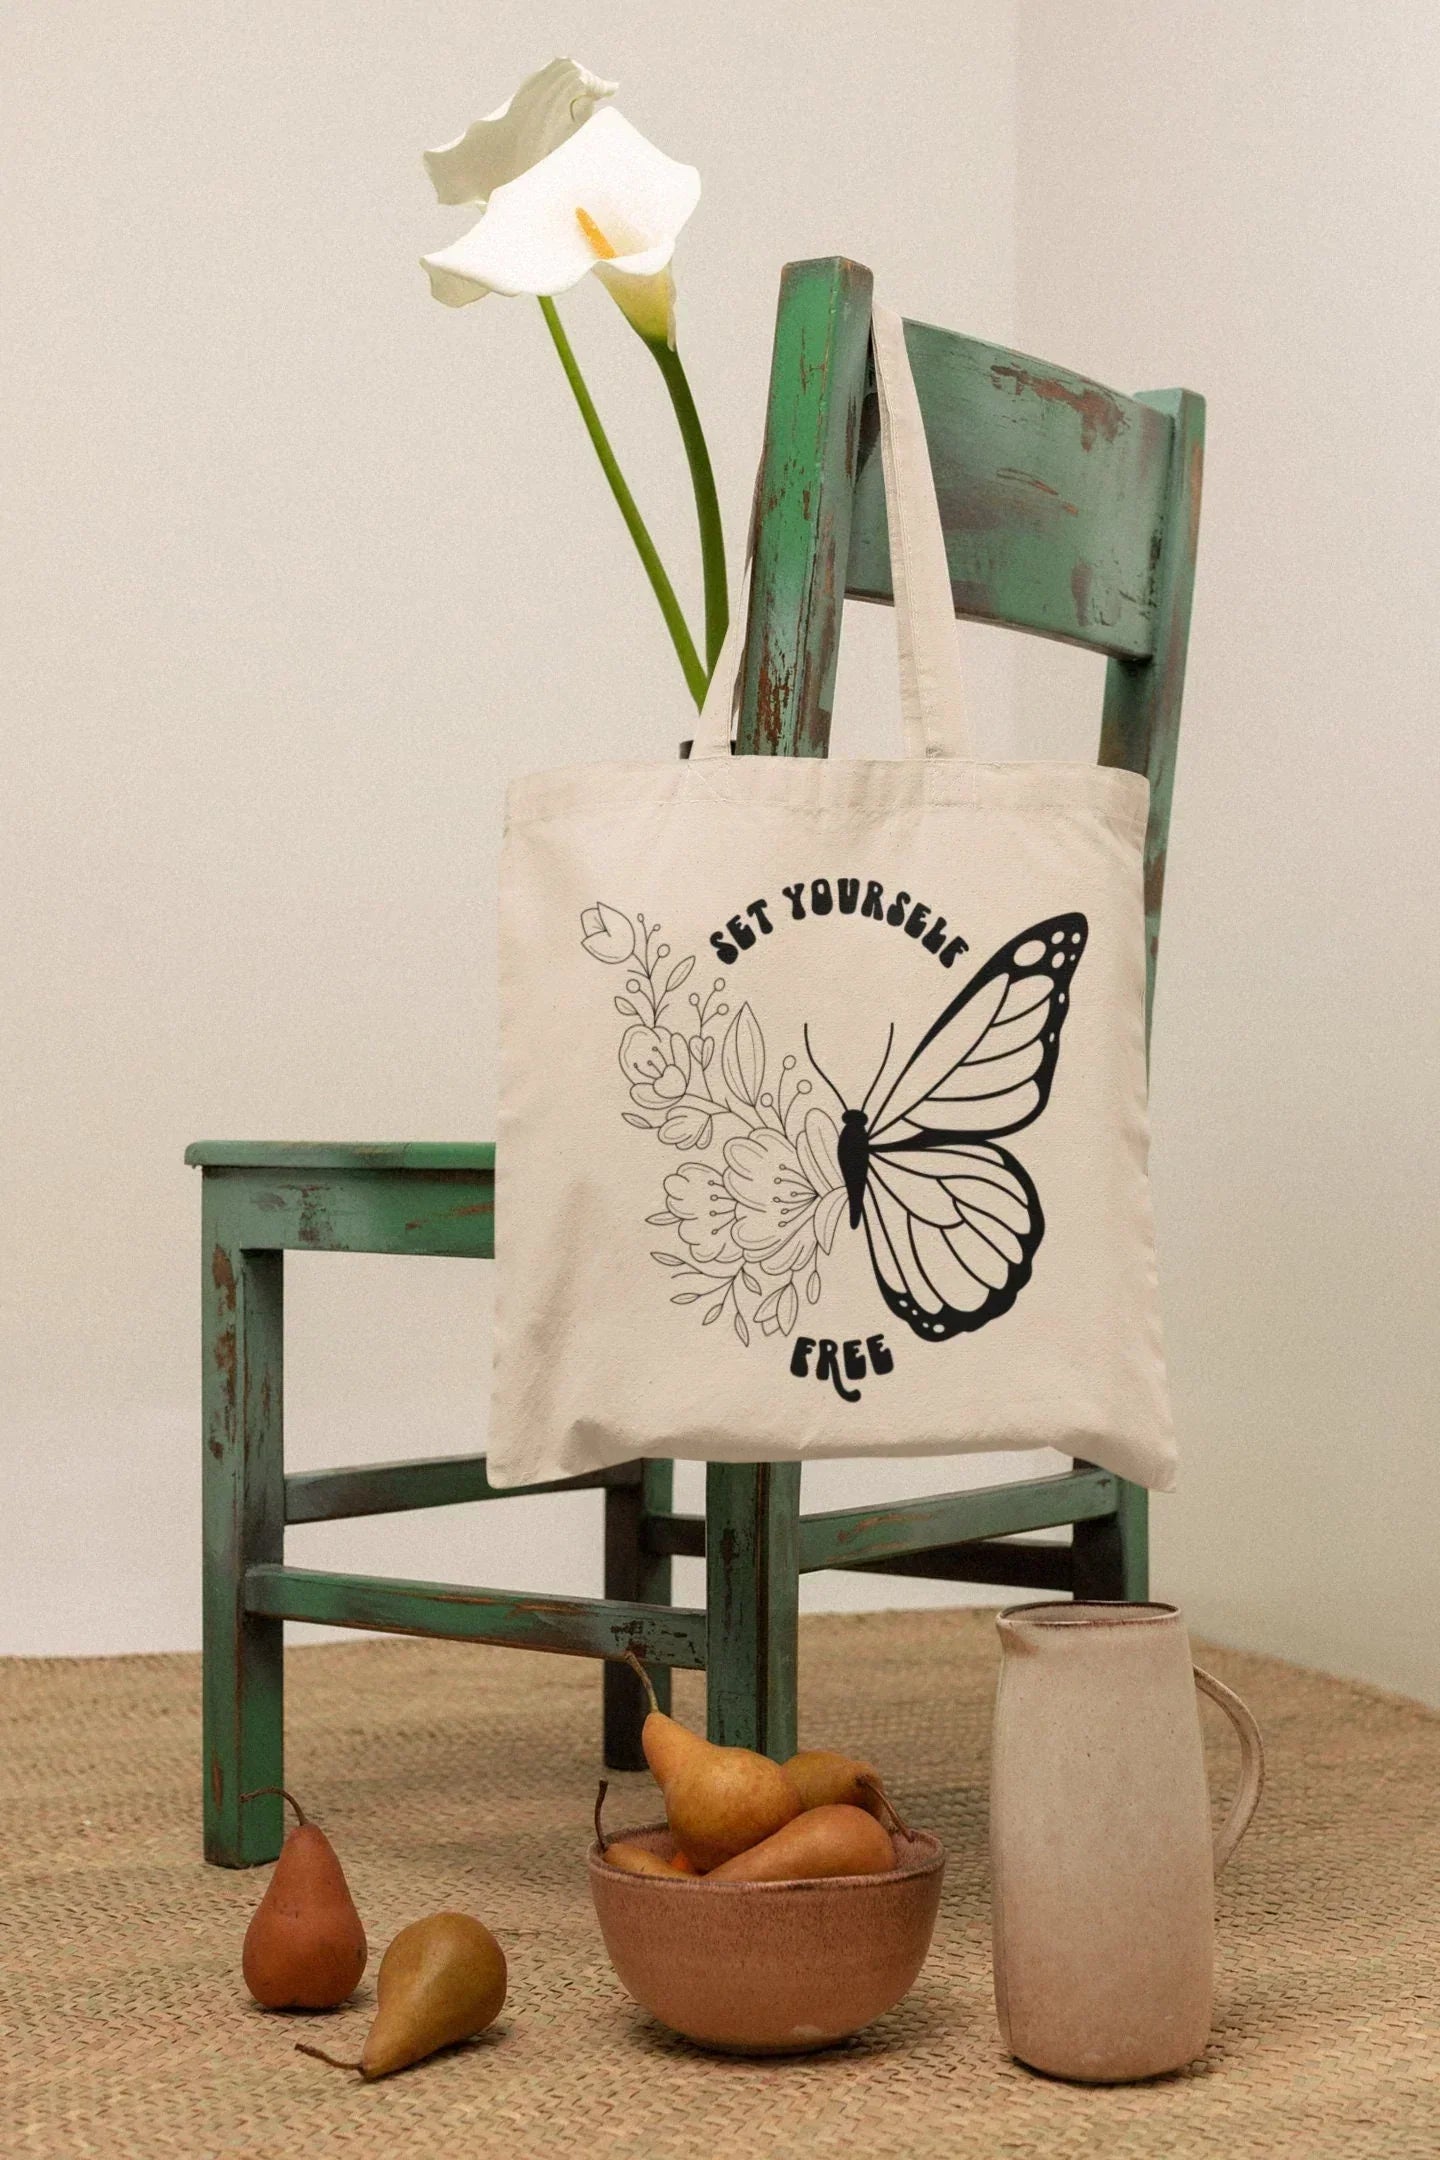 Floral Tote Bag Aesthetic, Butterfly Reusable Grocery Bag, Large Book Tote Bag, Cute Retro Nature Tote Bag, Wildflower Canvas Bag, Sunflower HMDesignStudioUS